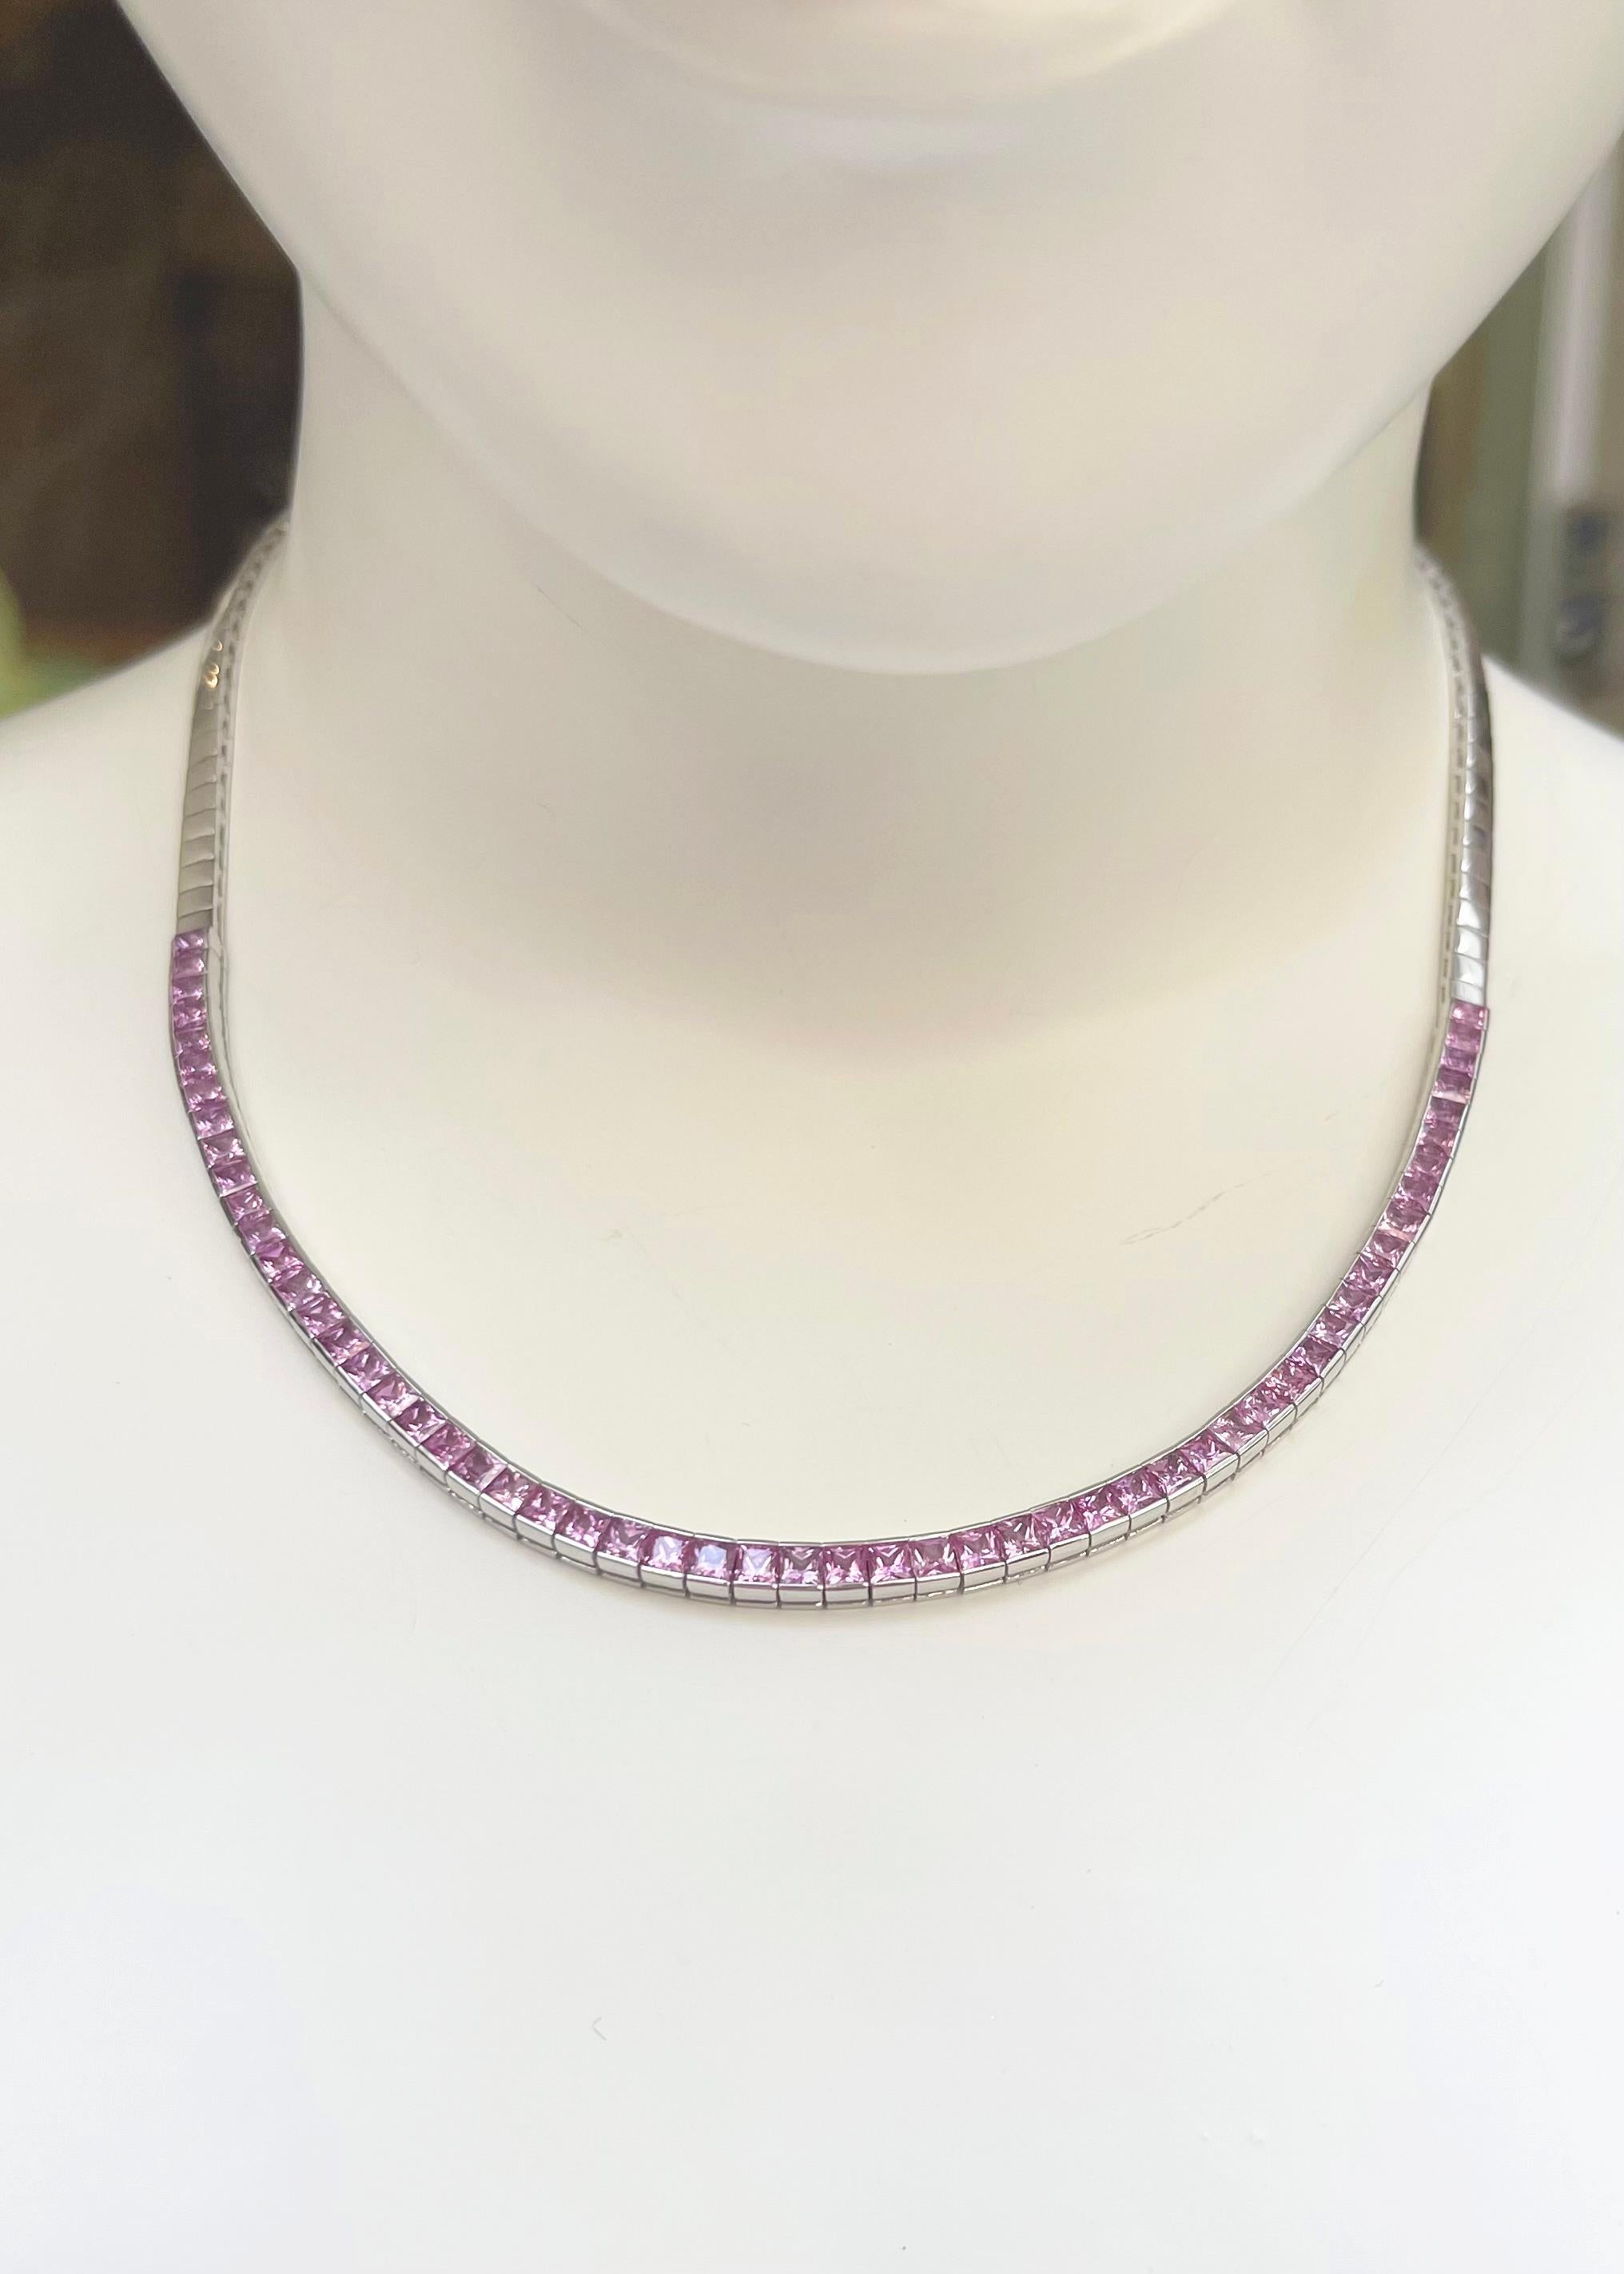 Pink Sapphire 9.18 carats Necklace set in 18K White Gold Settings

Width: 0.4 cm 
Length: 42 cm
Total Weight: 36.58 grams

